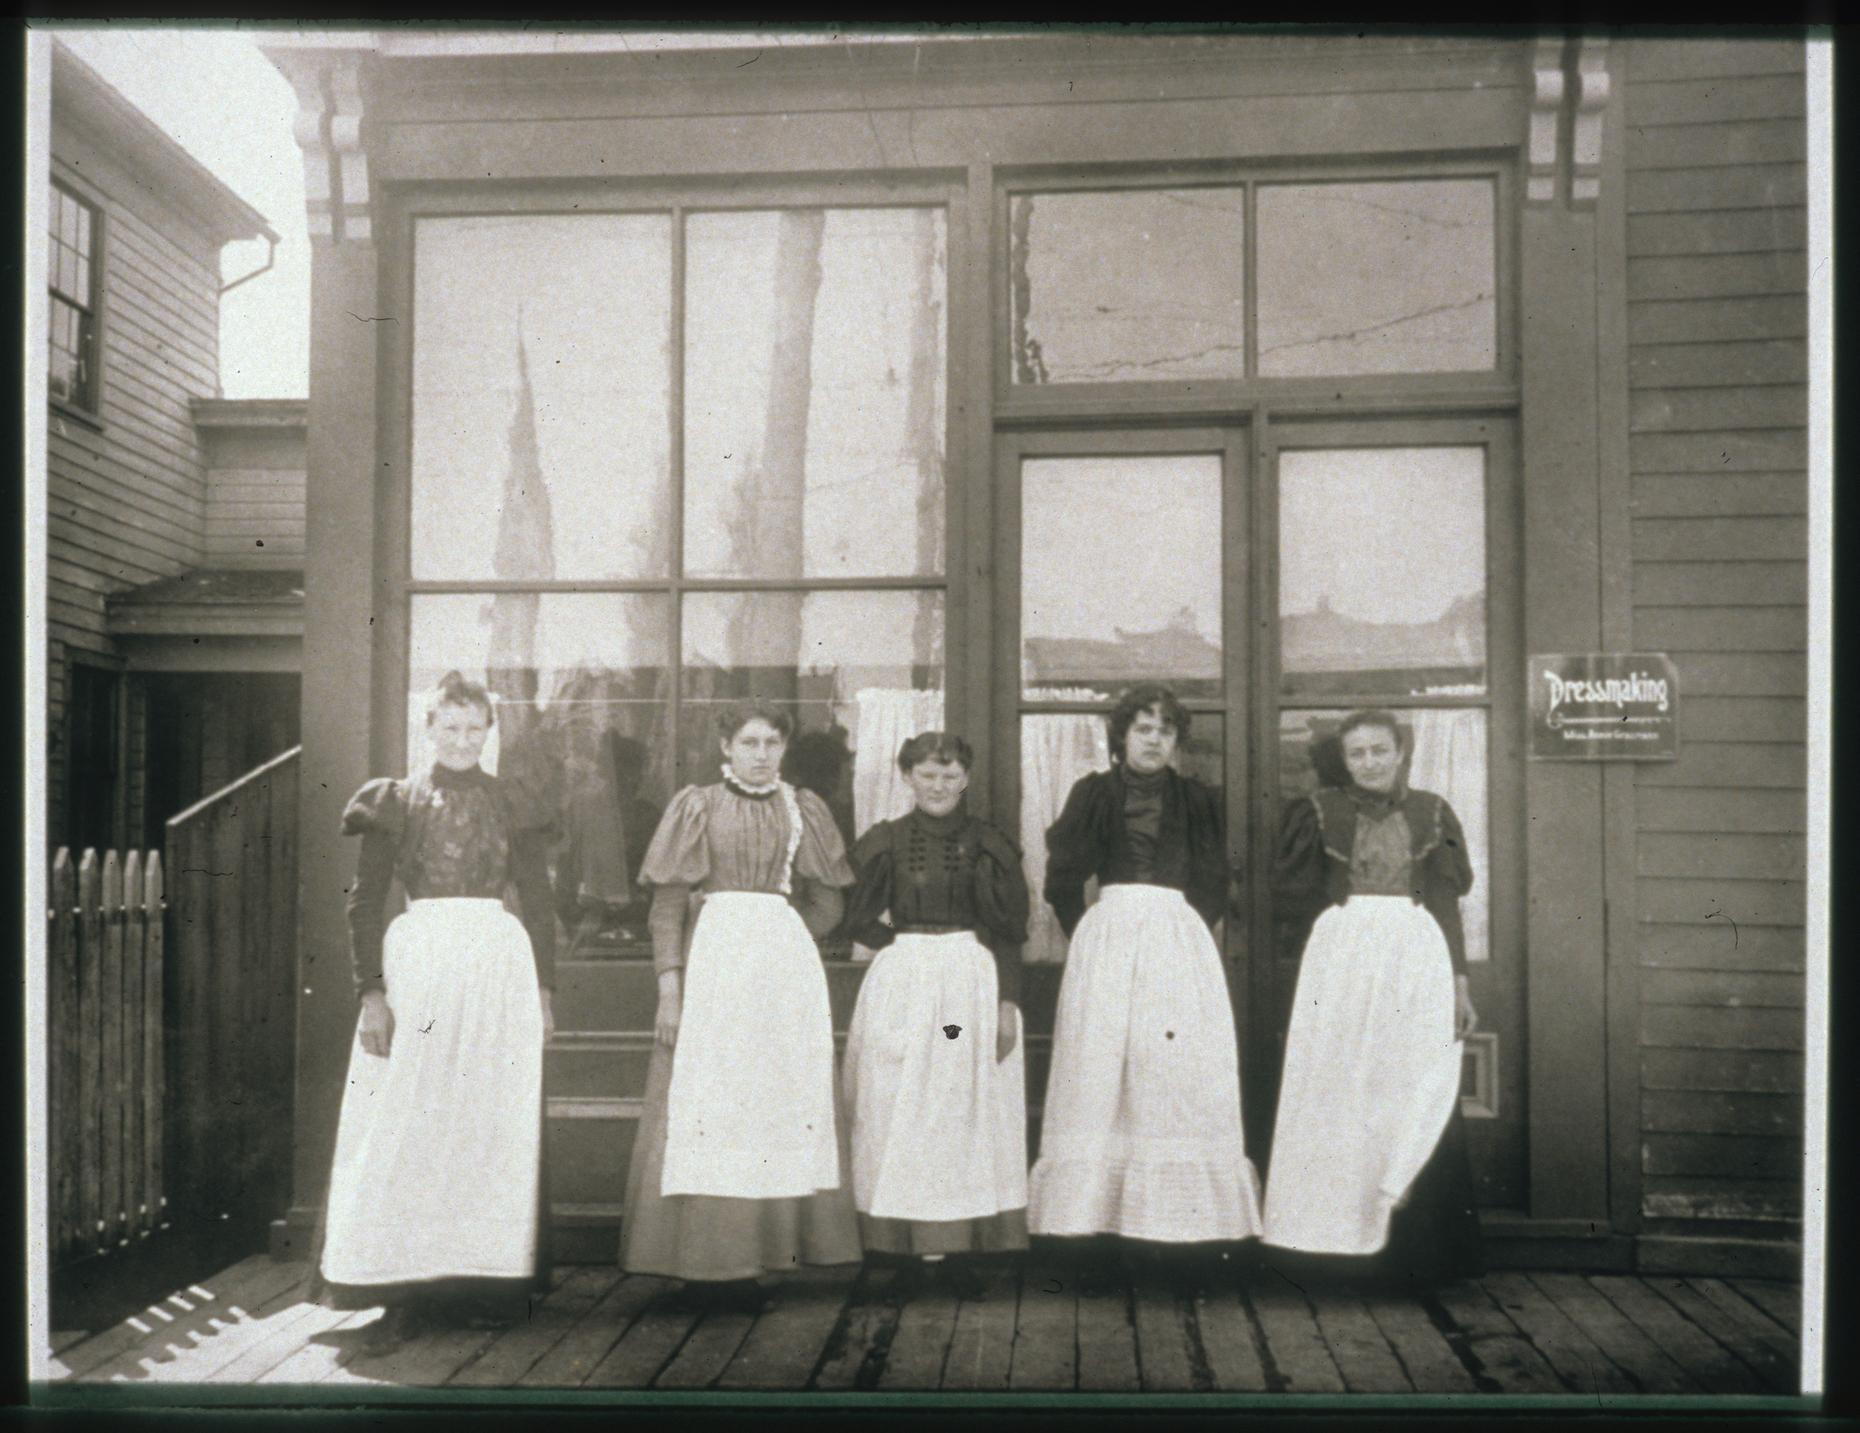 Miss Annie Graumann dressmaking shop, possibly located at 623 Franklin Street. This was a flourishing trade with 70 dressmakers listed in the 1901 city directory.